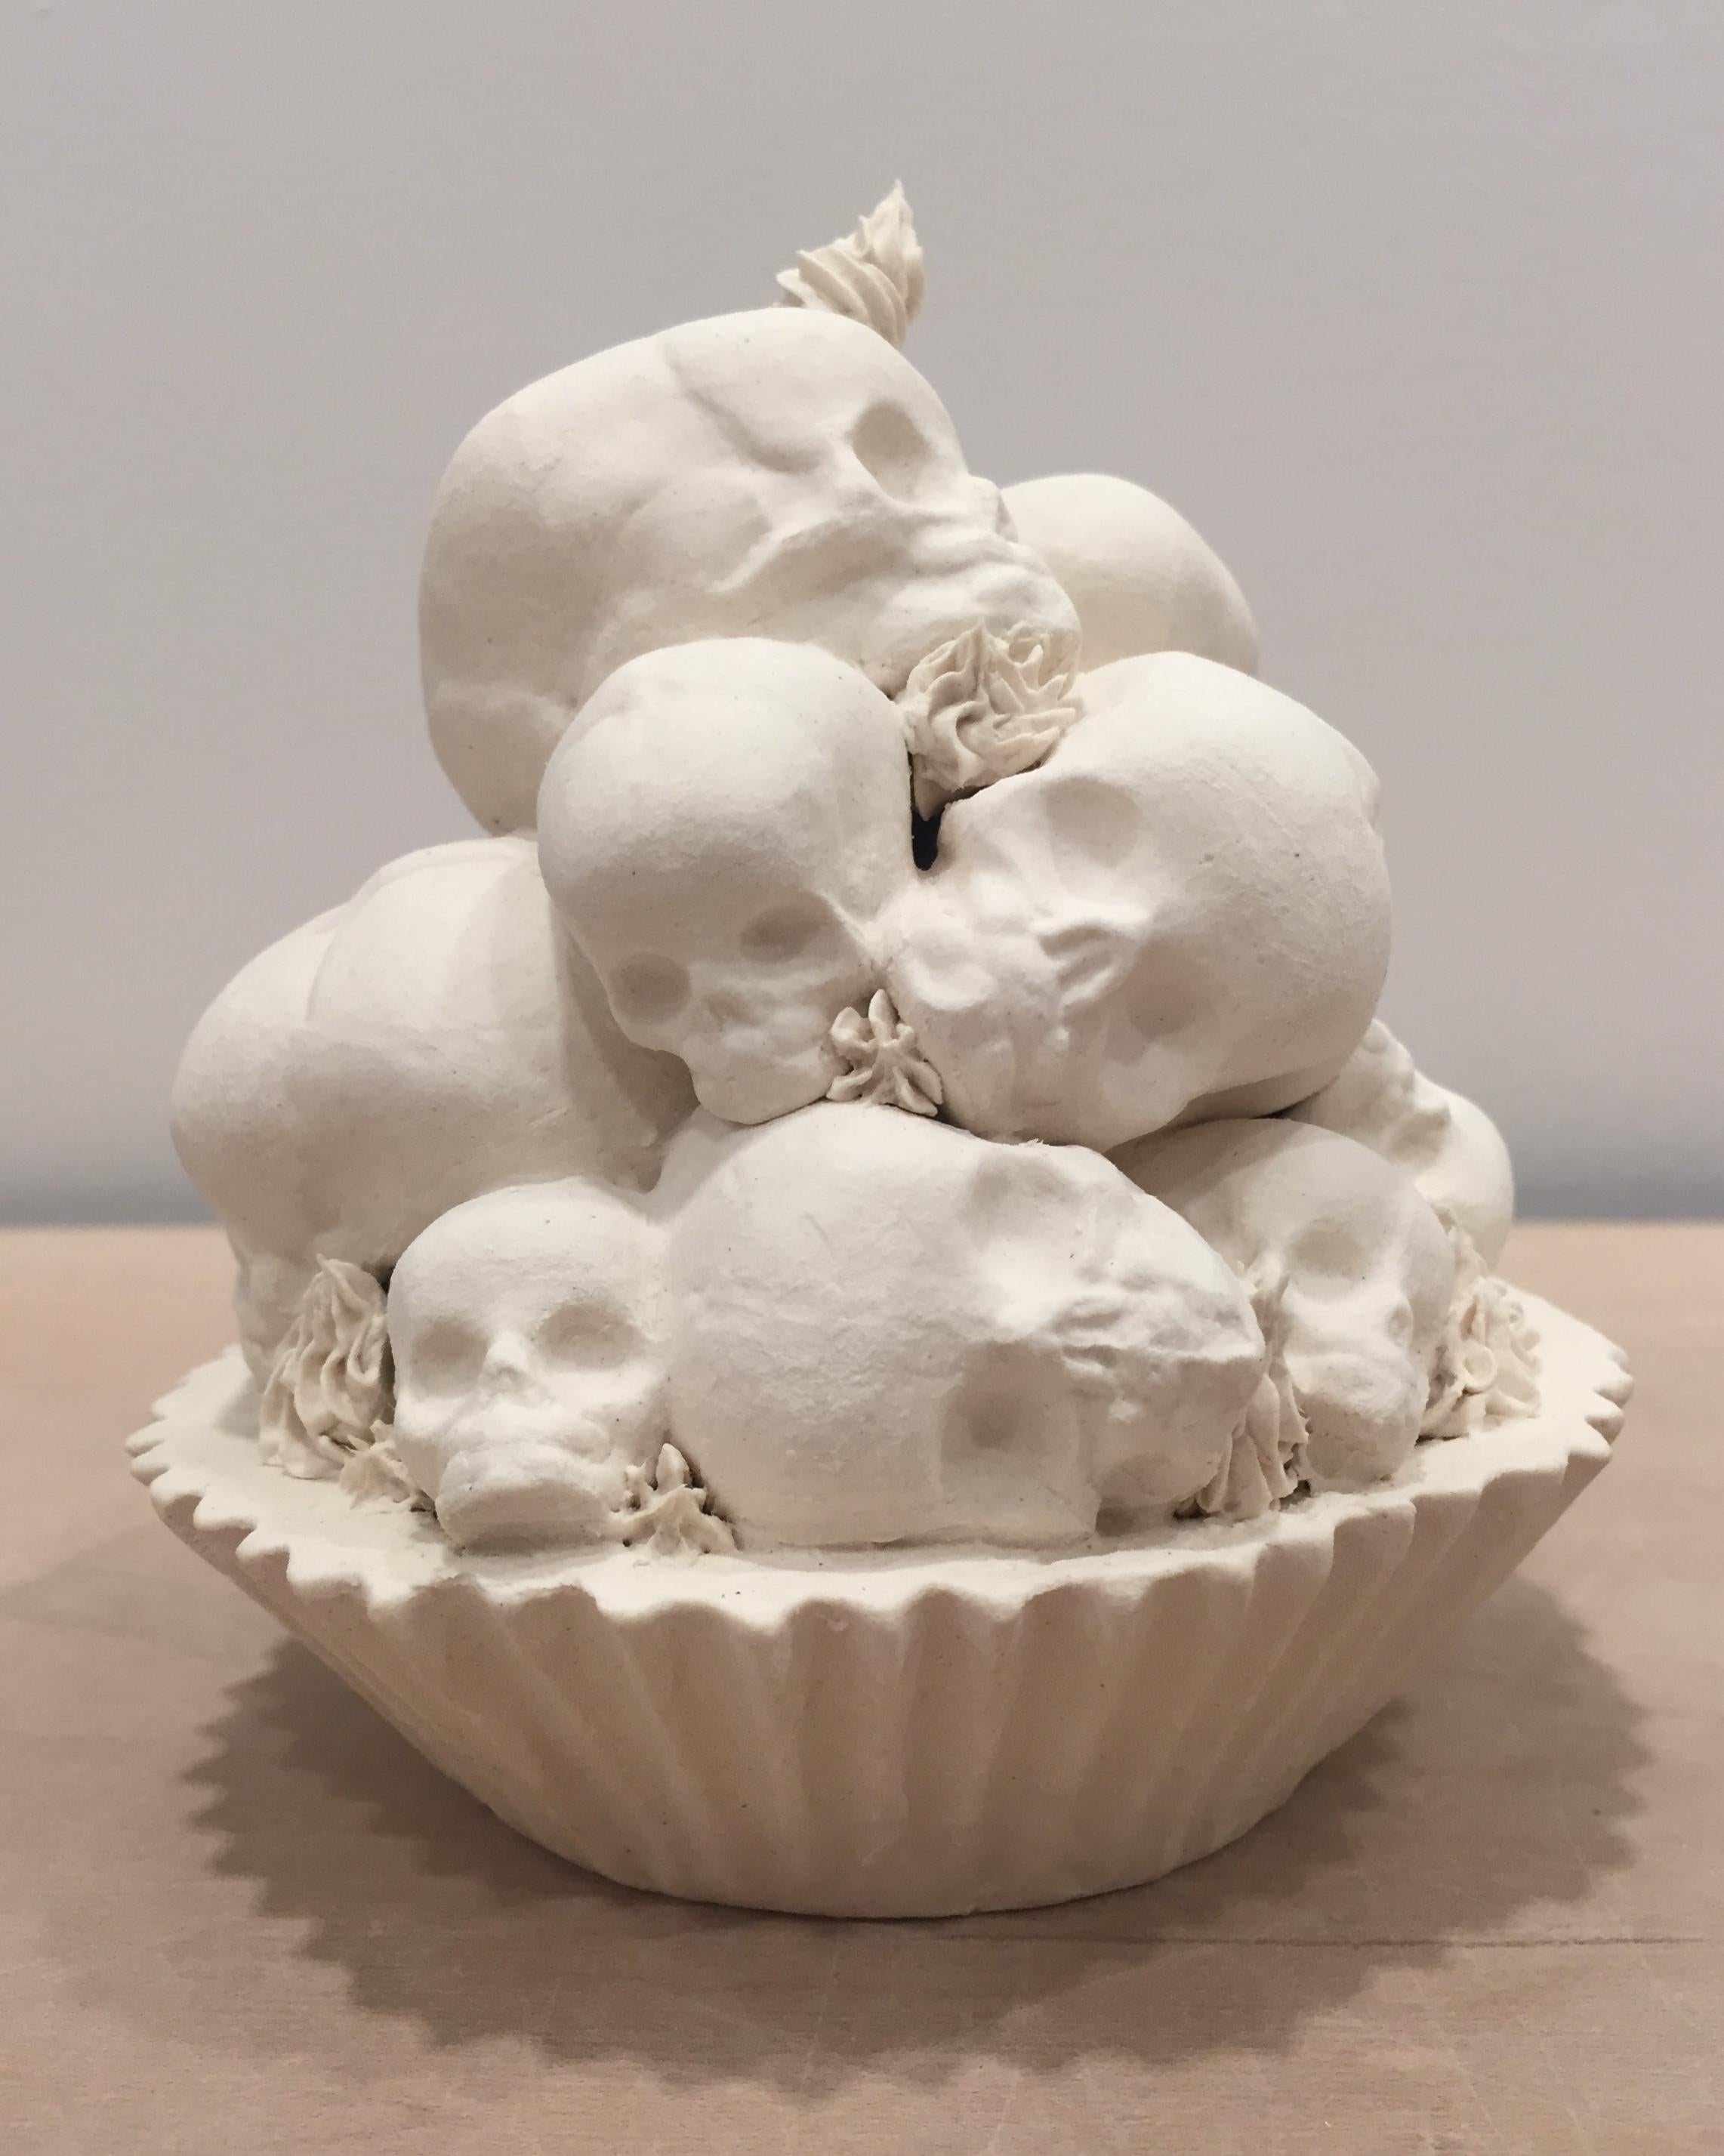 This piece consists of a porcelain slip-casted base, intricately topped with slip-casted fetus skulls, and decorated with hand piped details.

Jacqueline Tse channels her love-hate relationship with sugar into intricate porcelain sculptures of